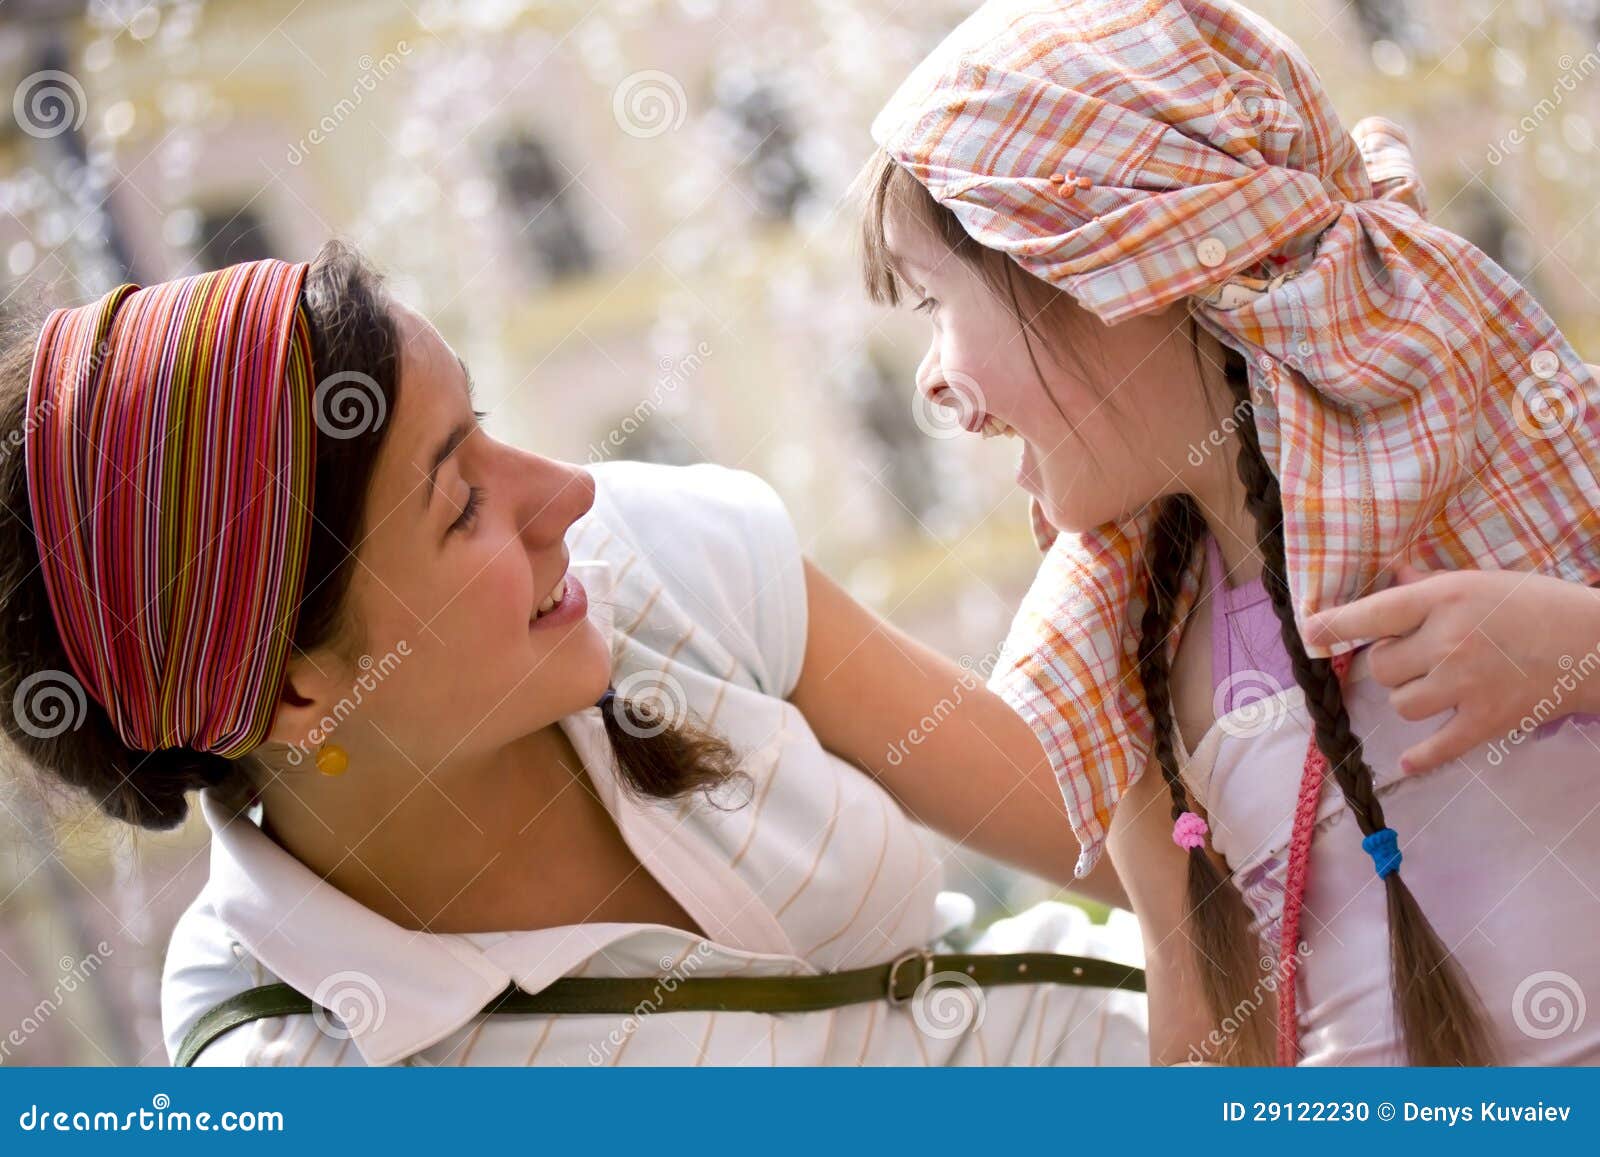 Happy family moments stock photo. Image of female, cheerful - 29122230